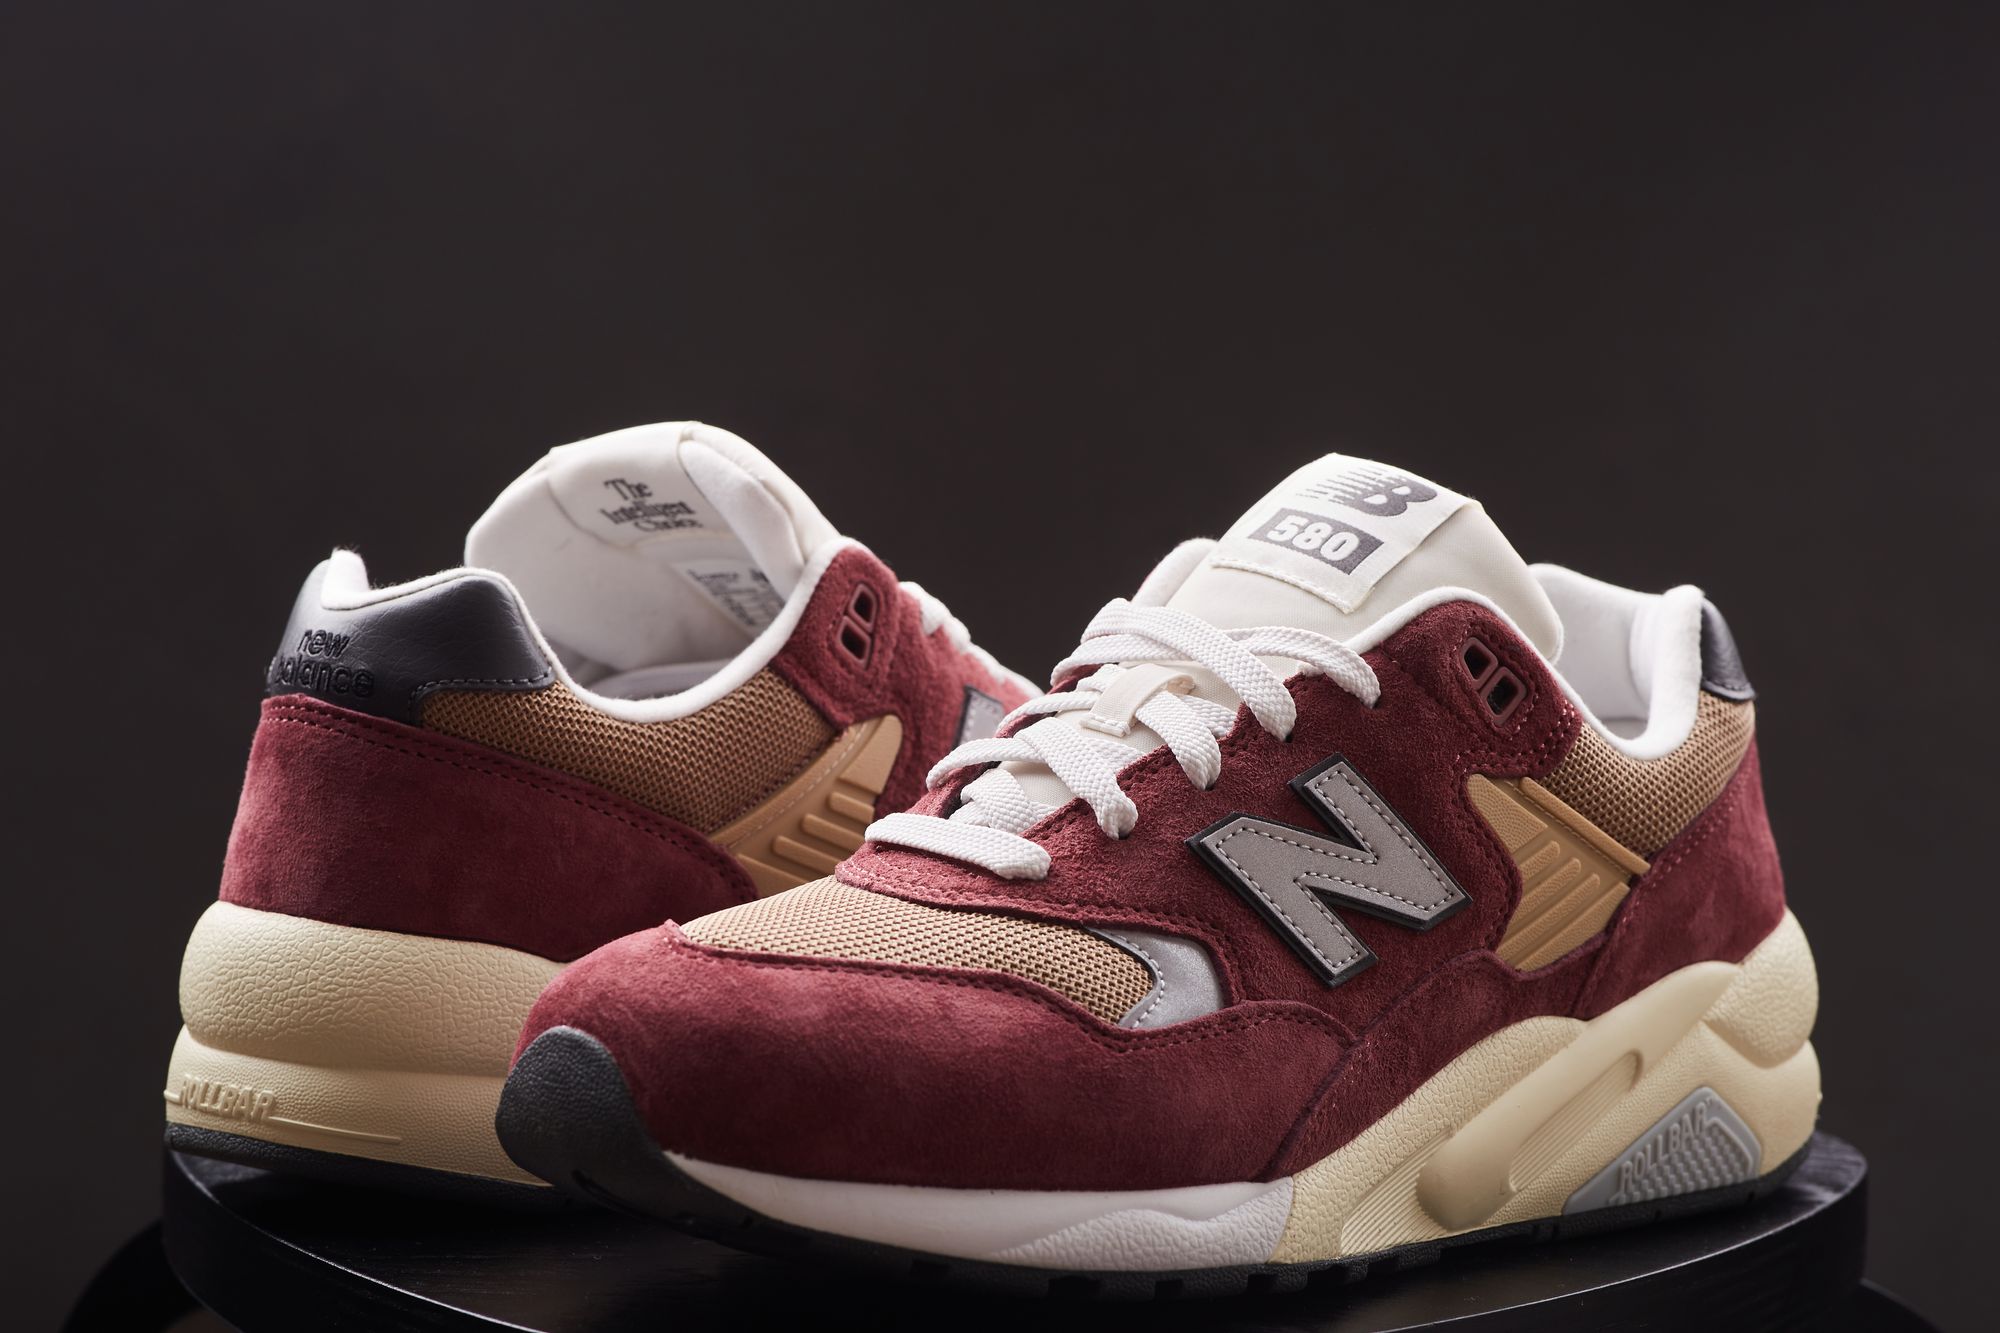 A Review Of The New Balance 580 Sneakers